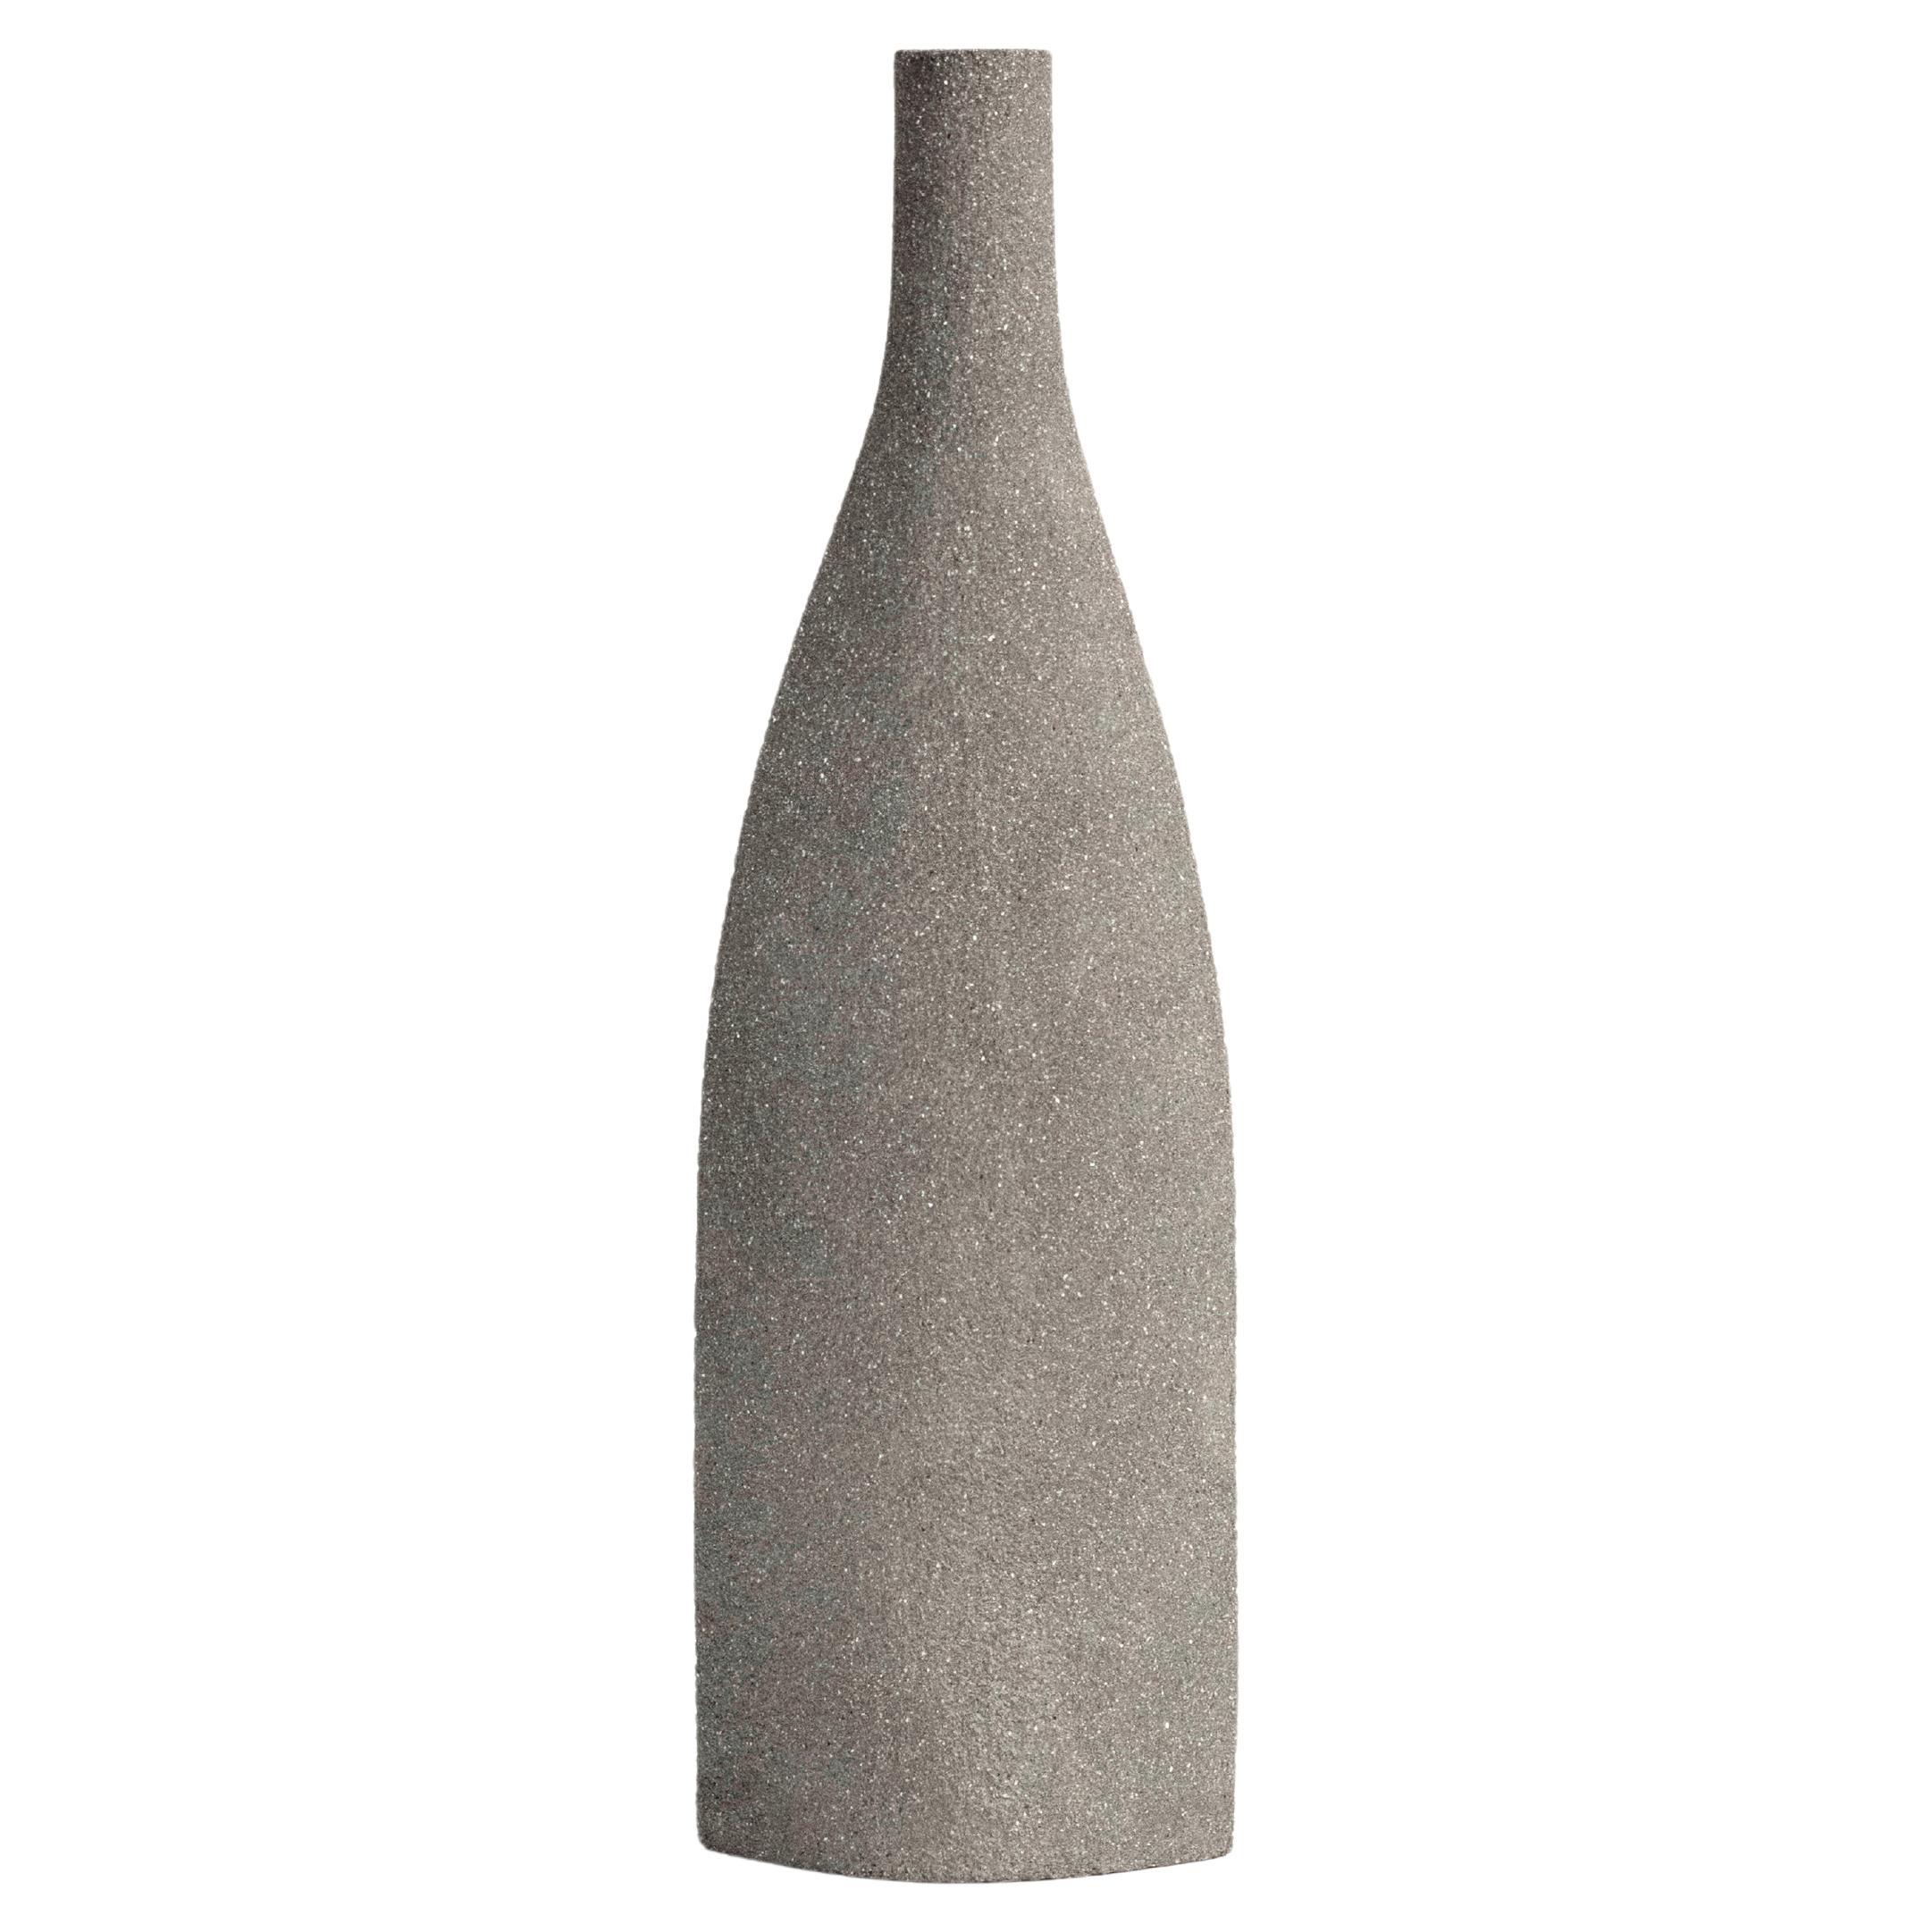 21st Century Bouteille 'M' Vase in Grey Ceramic, Hand-Crafted in France